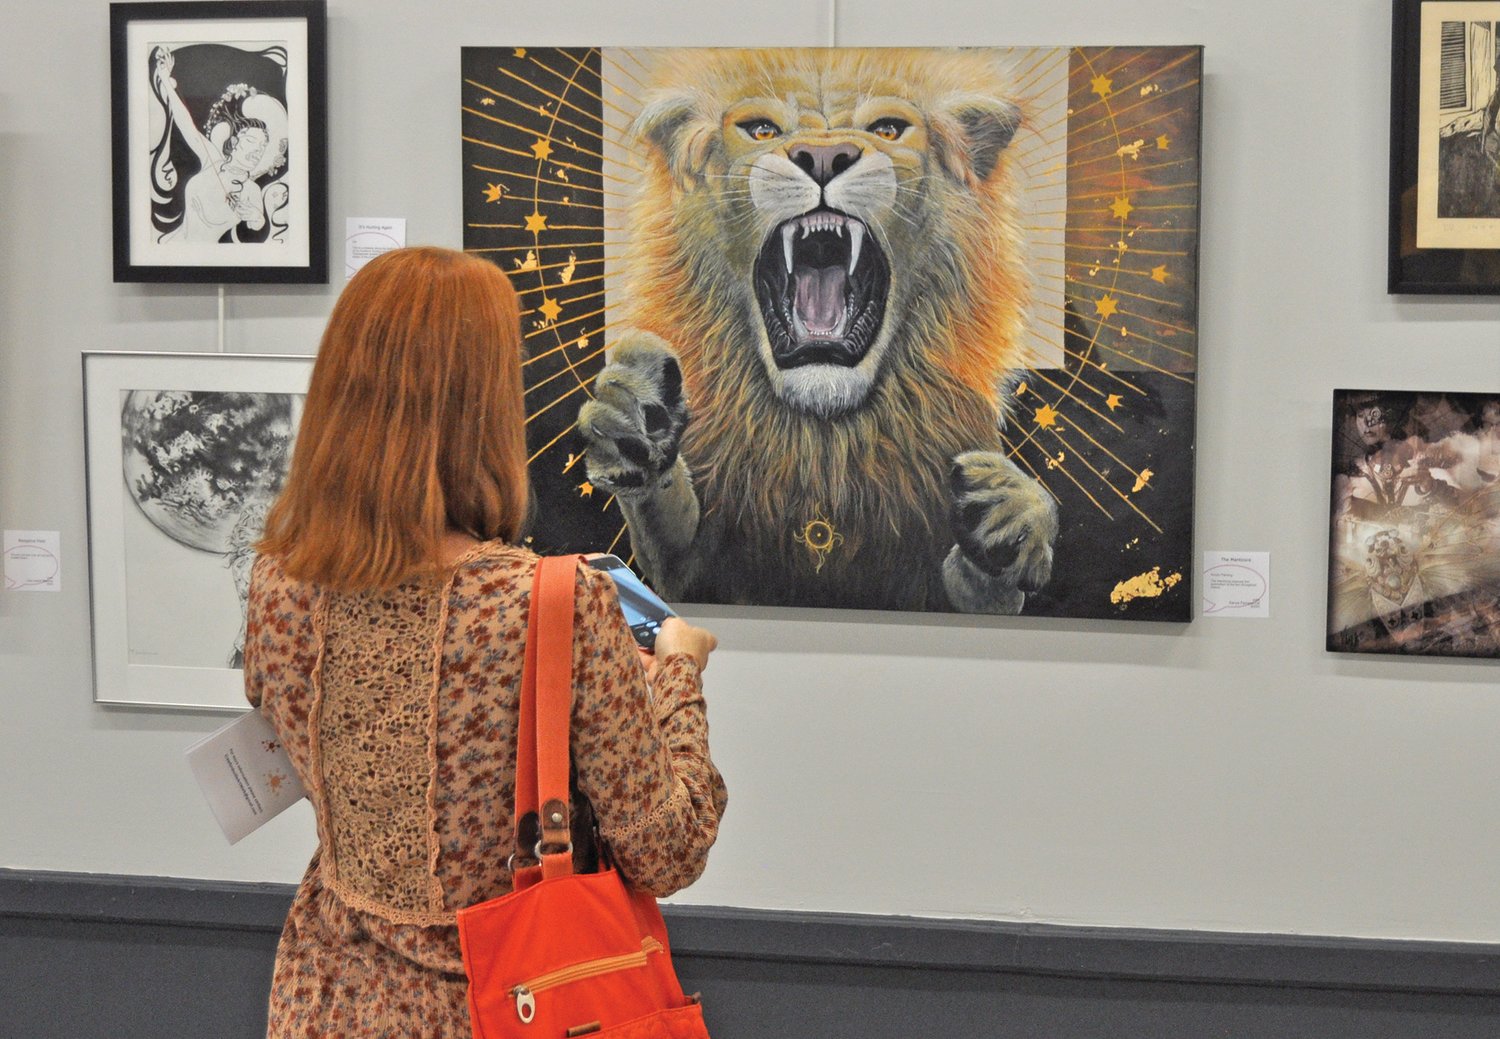 Wendy Schmitzer-Torbert looks at a painting in the Athens Arts Gallery on Saturday. The gallery was a stop on the Art Walk sponsored by the Montgomery County Art League.